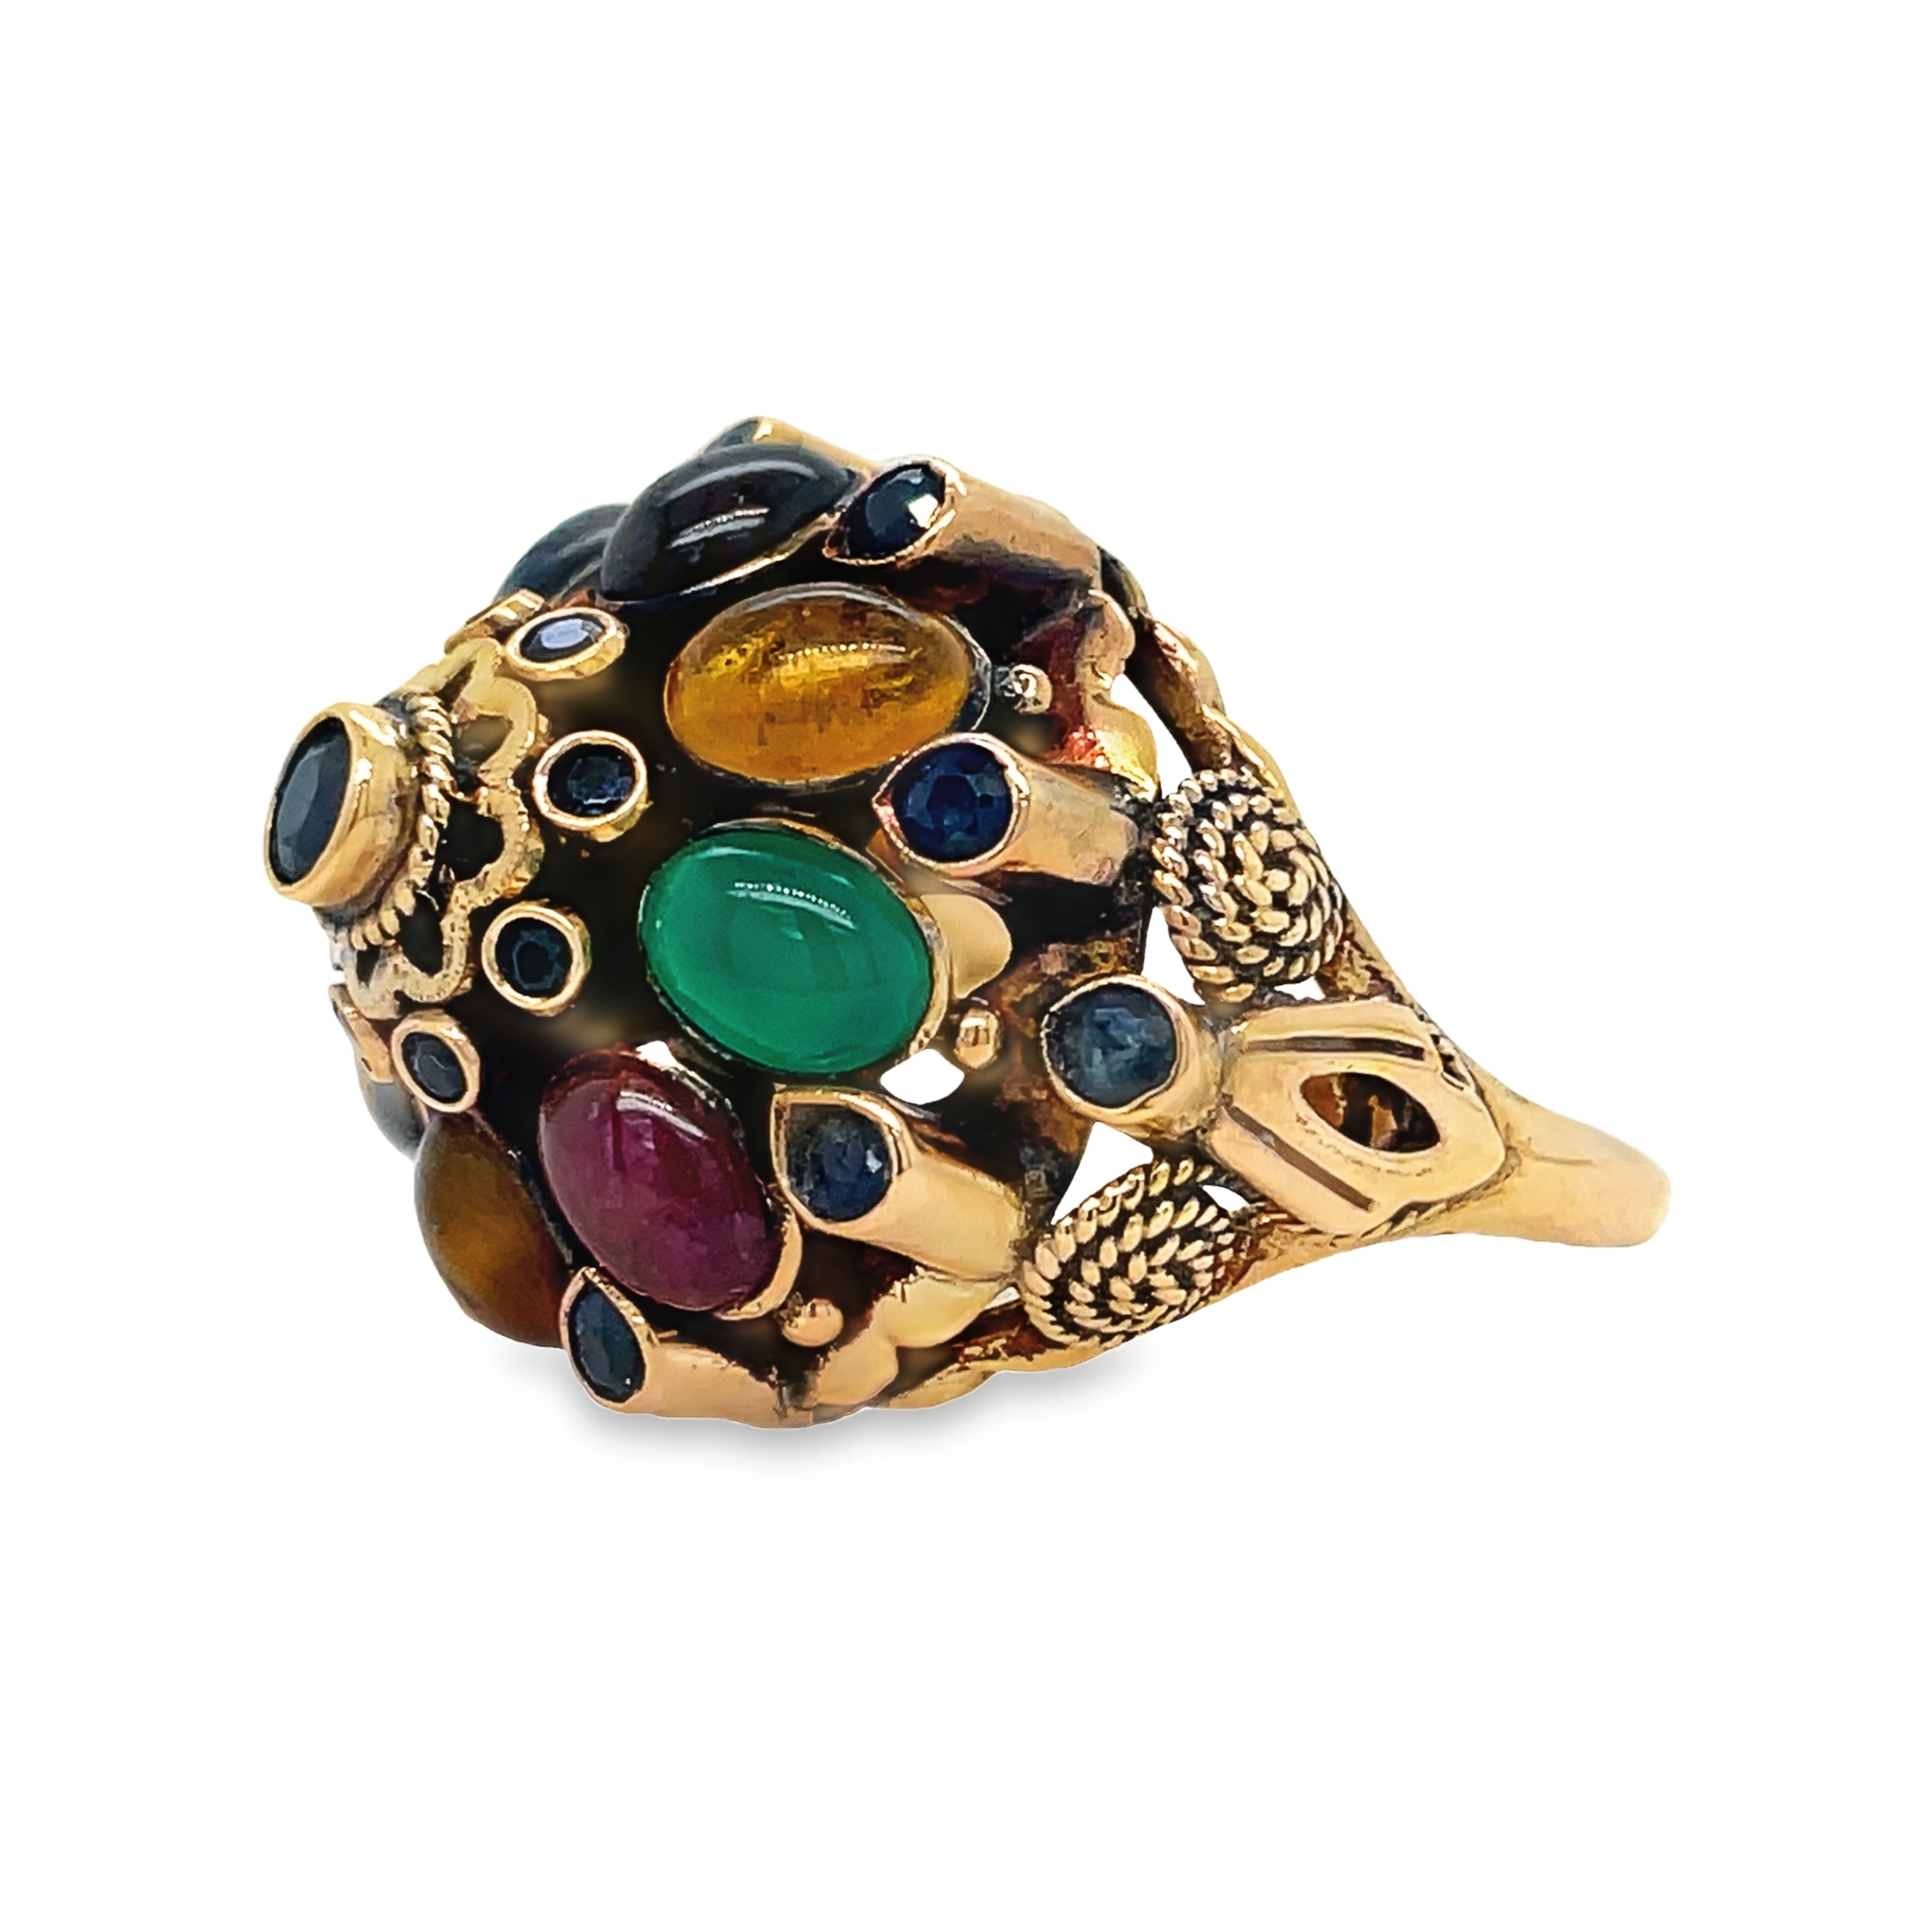 Discover a stunning blend of vintage style and luxury with our Color Stone Cluster Ring. Crafted with a mix of cabochon sapphires, emeralds and rubies, set in 14k yellow gold, this ring offers a one-of-a-kind look. Available in size 6.5.